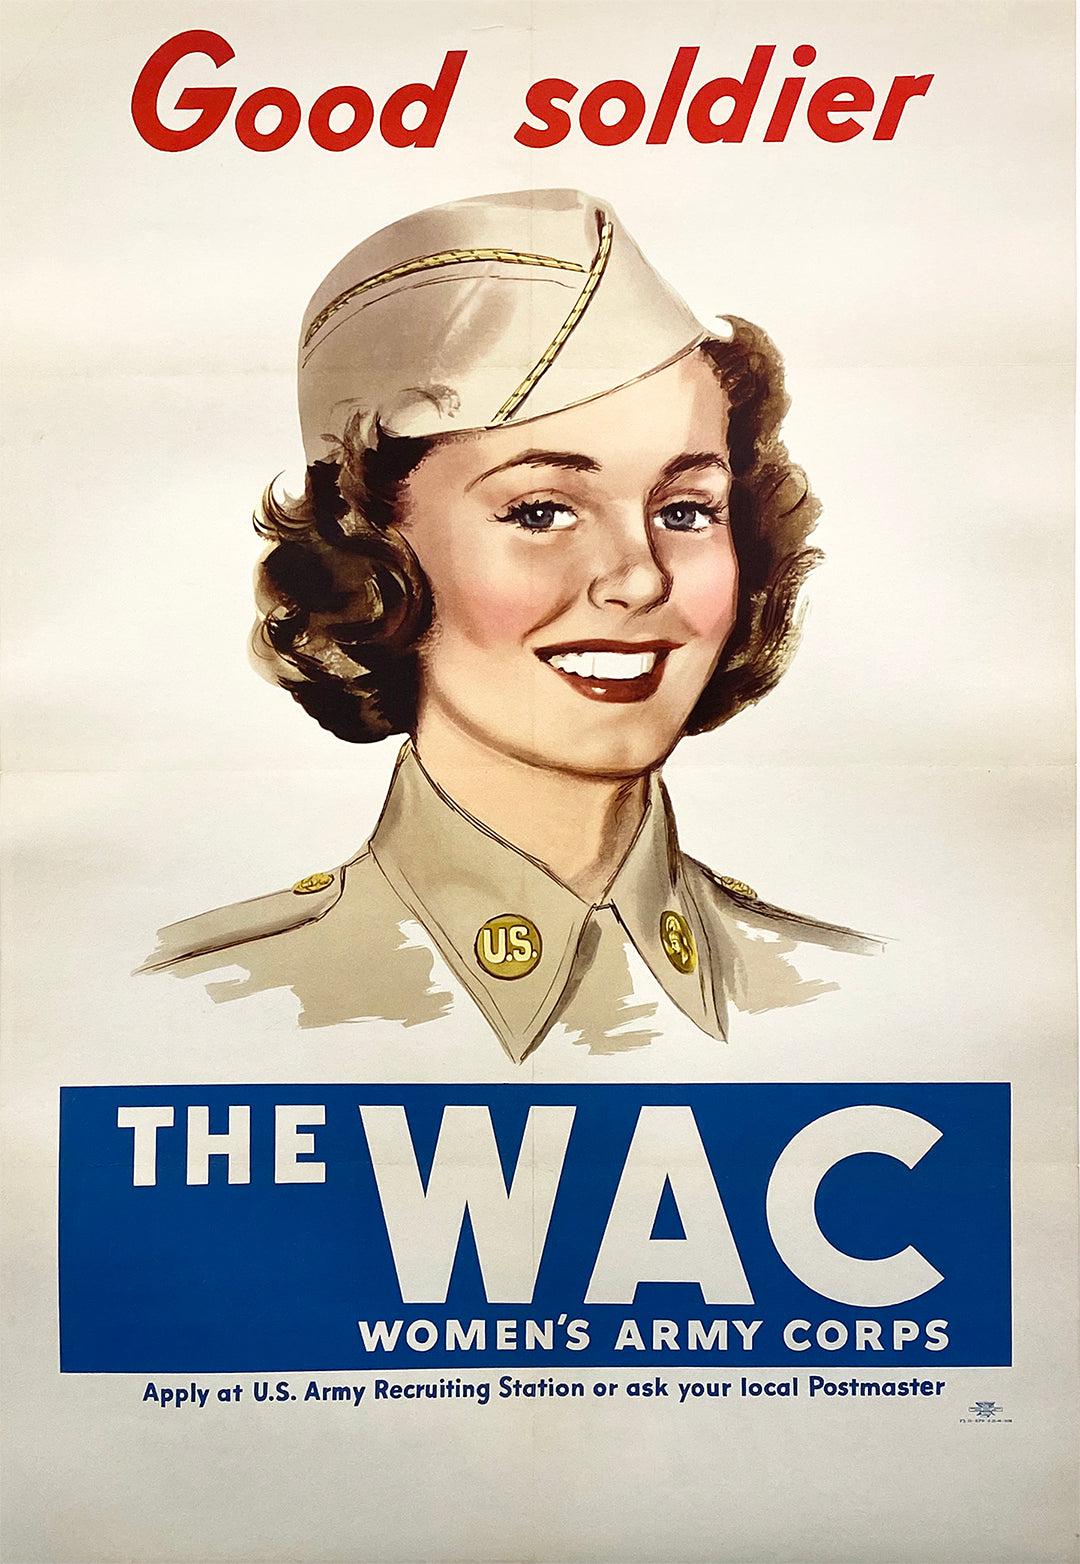 Good Soldier The Women's Army Corp WAC - Original WWll Poster